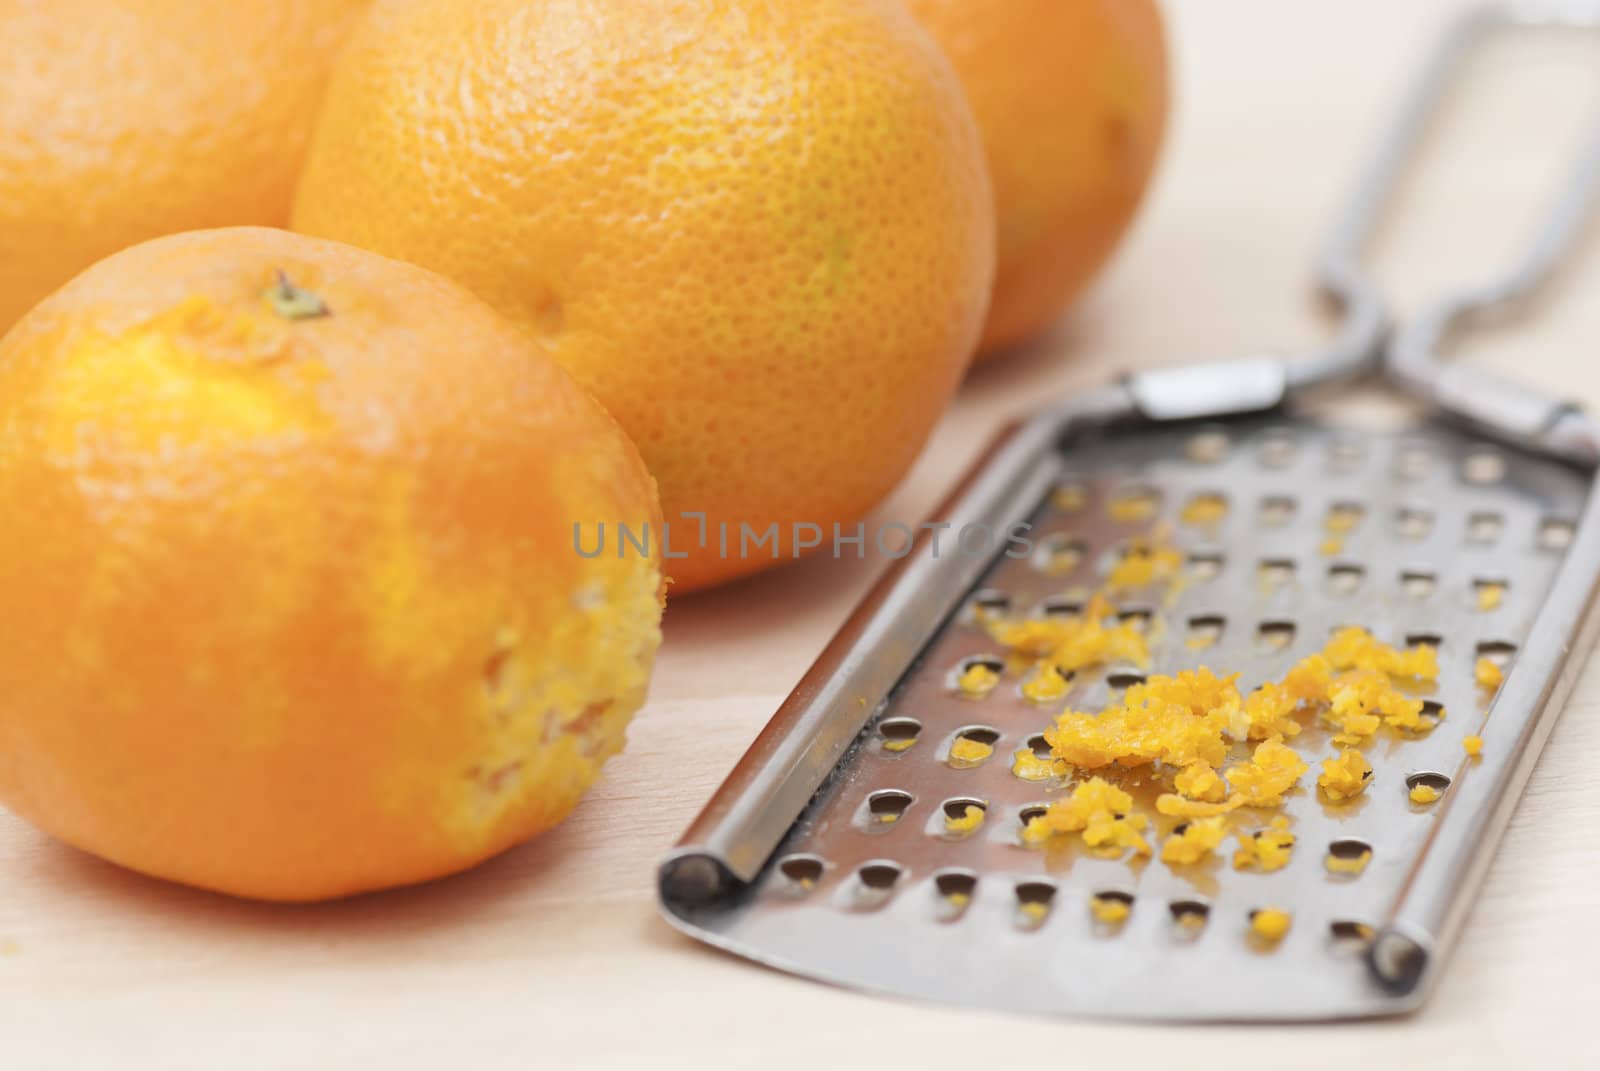 Grater and citrus zest on wooden kitchen surface.